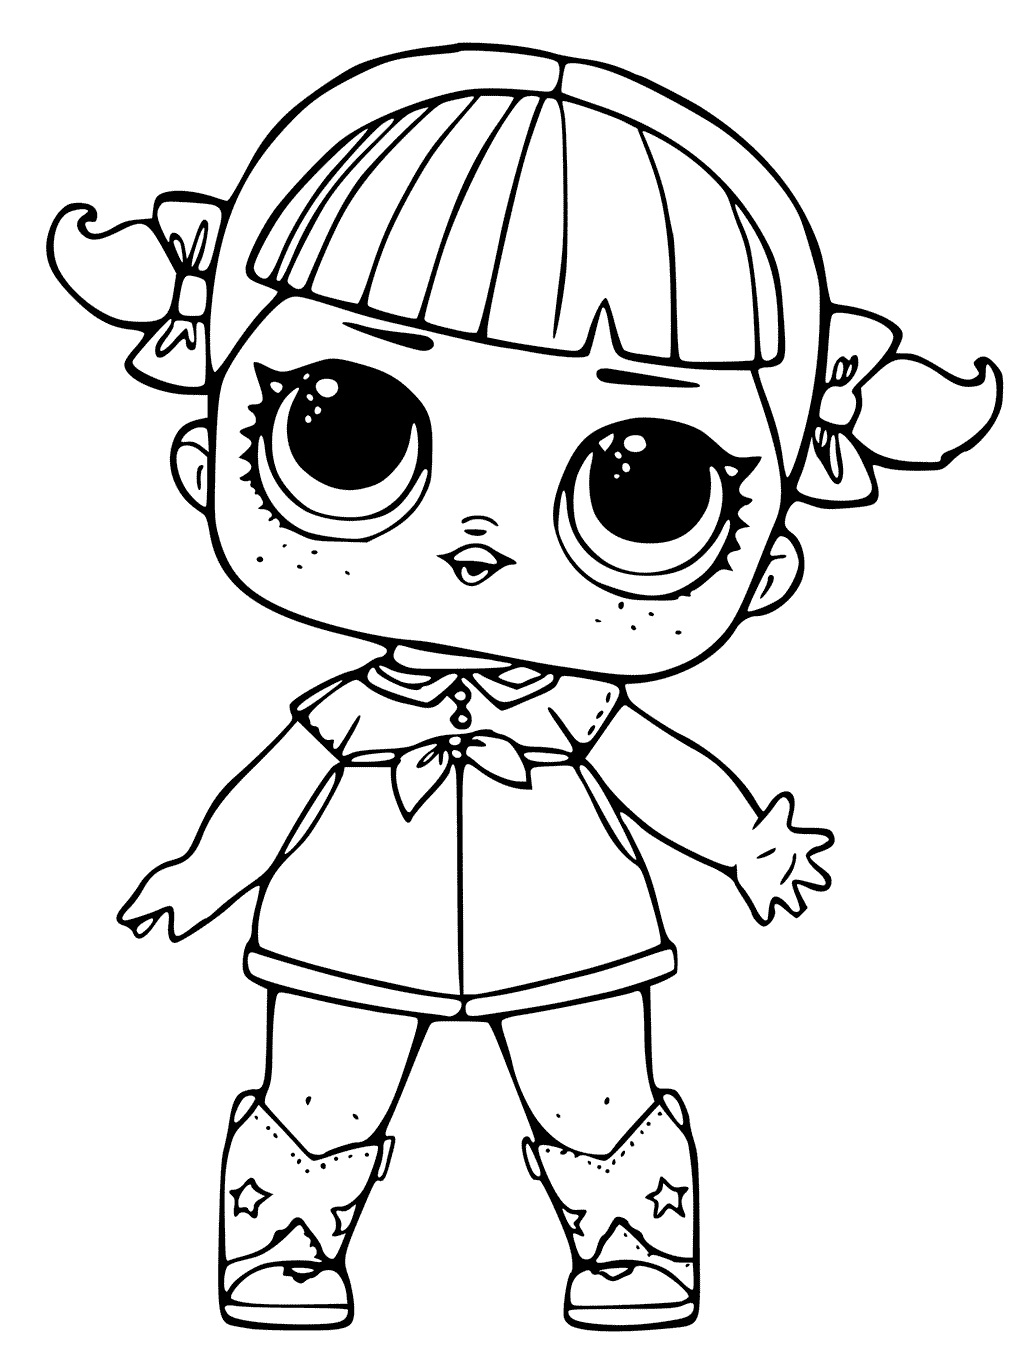 Coloring Pages Of LOL Surprise Dolls. 20 Pieces Of Black And White ...